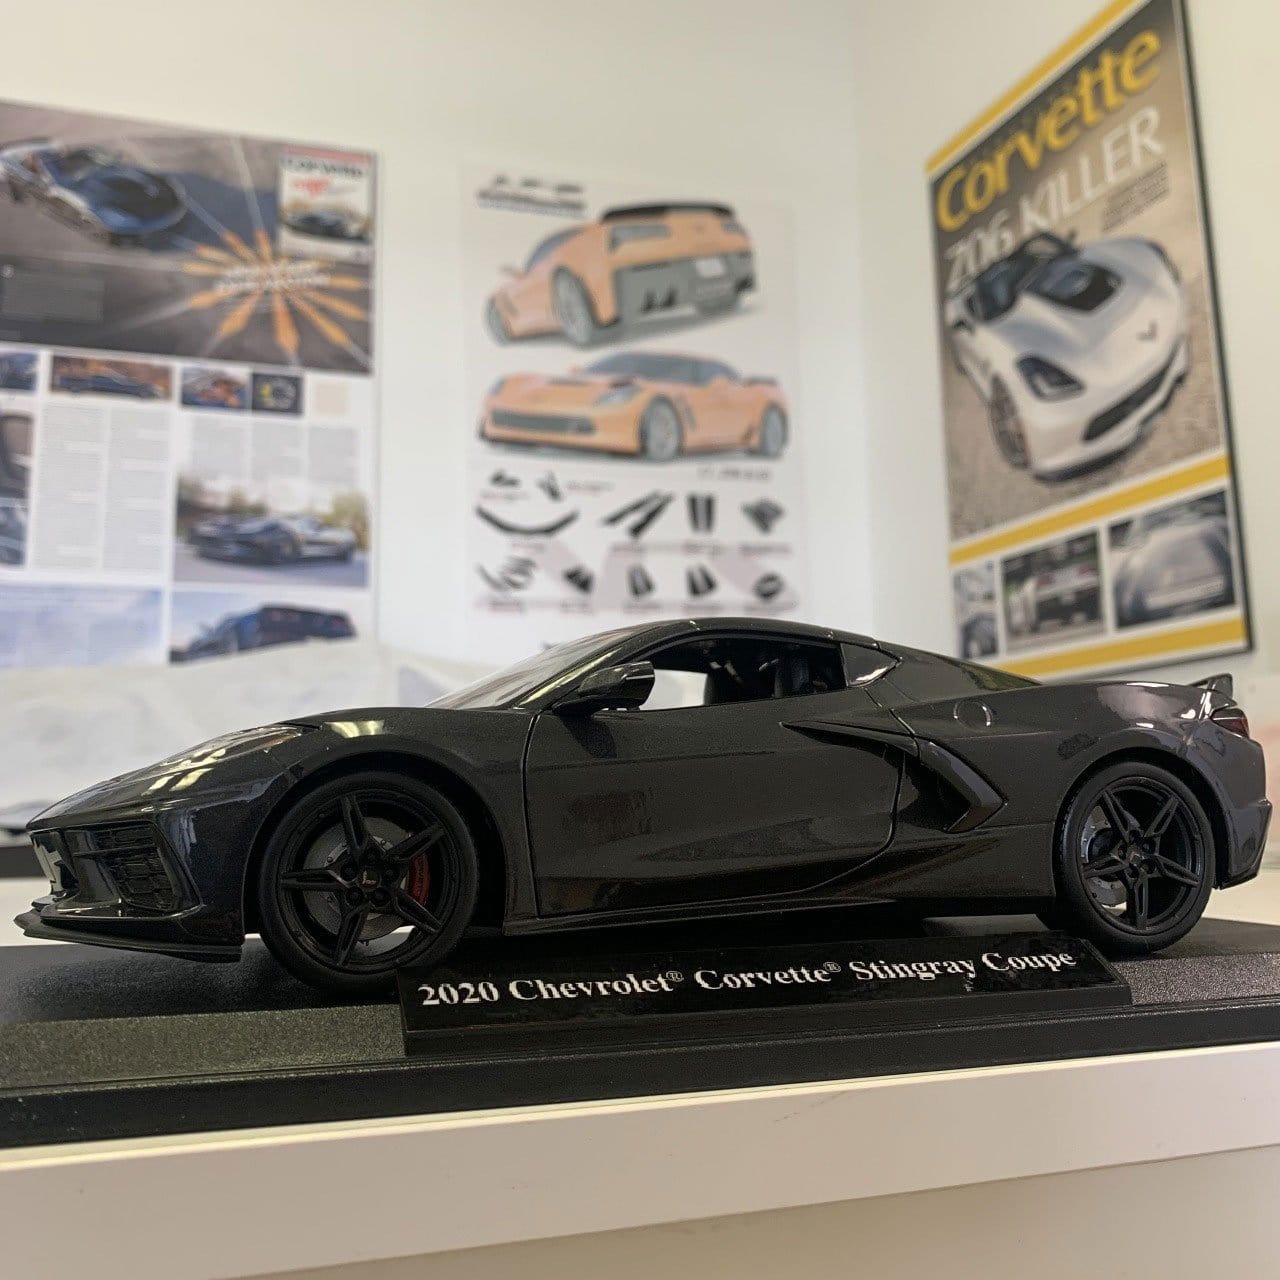 2020 Die Cast Corvette Stingray in Black, Red, or White - Z51 Equipped with CFZ Spoiler and Mirrors, Splitter and Rockers Spears, Coupe Body Style - SKU nan